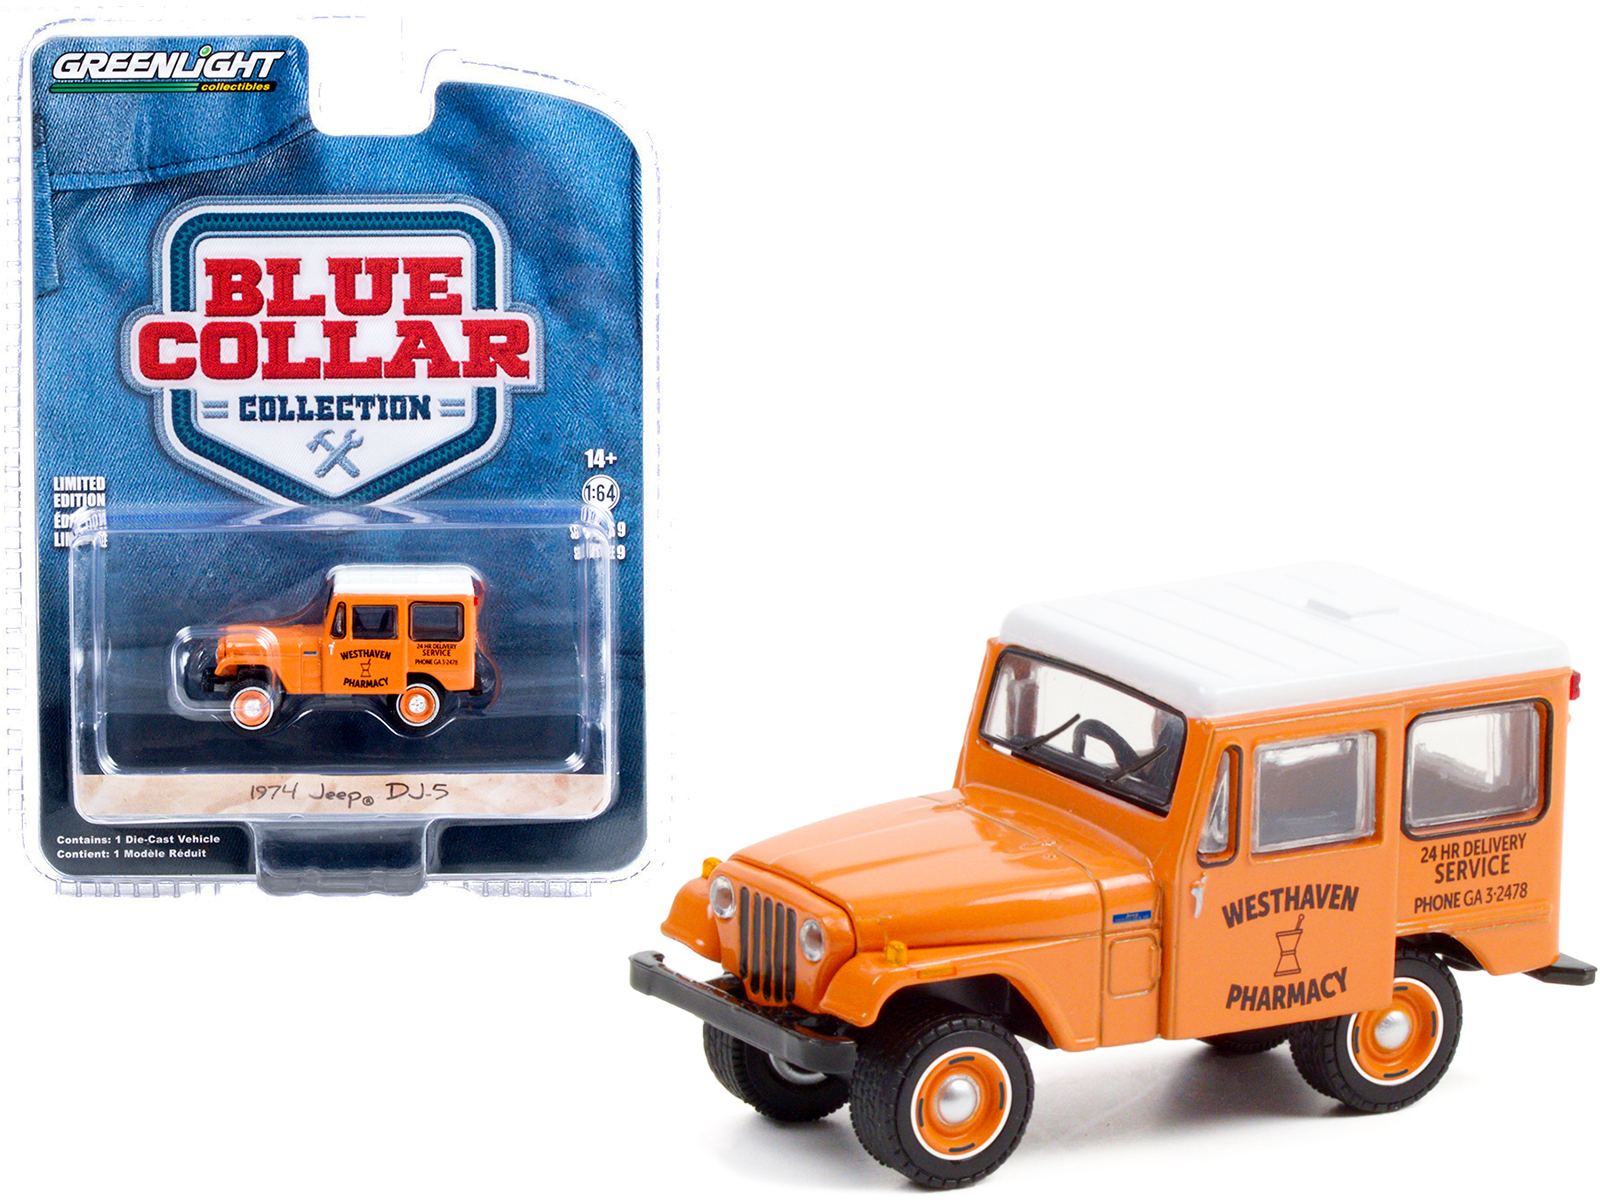 GreenLight 1974 Jeep DJ-5 "Westhaven Pharmacy" Orange with White Top "Blue Collar Collection" Series 9 1/64 Diecast Model Car by Greenlight